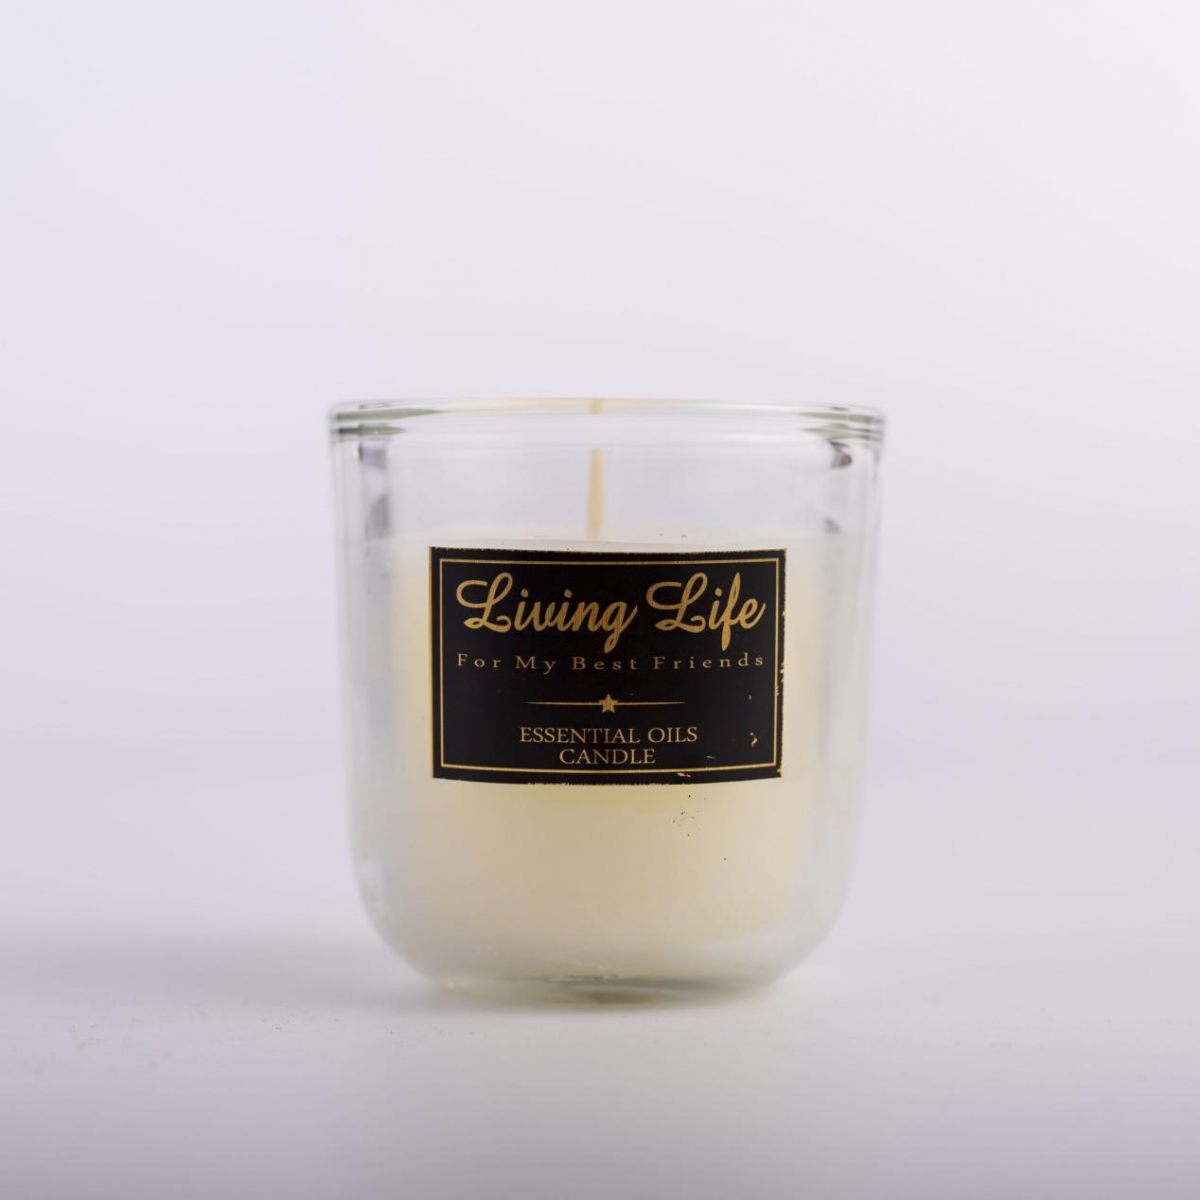 Vegan Candles – Essential Oils Candles In Glass Jar ,Aromatherapy Candles ,China Factory ,Wholesale Price-HOWCANDLE-Candles,Scented Candles,Aromatherapy Candles,Soy Candles,Vegan Candles,Jar Candles,Pillar Candles,Candle Gift Sets,Essential Oils,Reed Diffuser,Candle Holder,